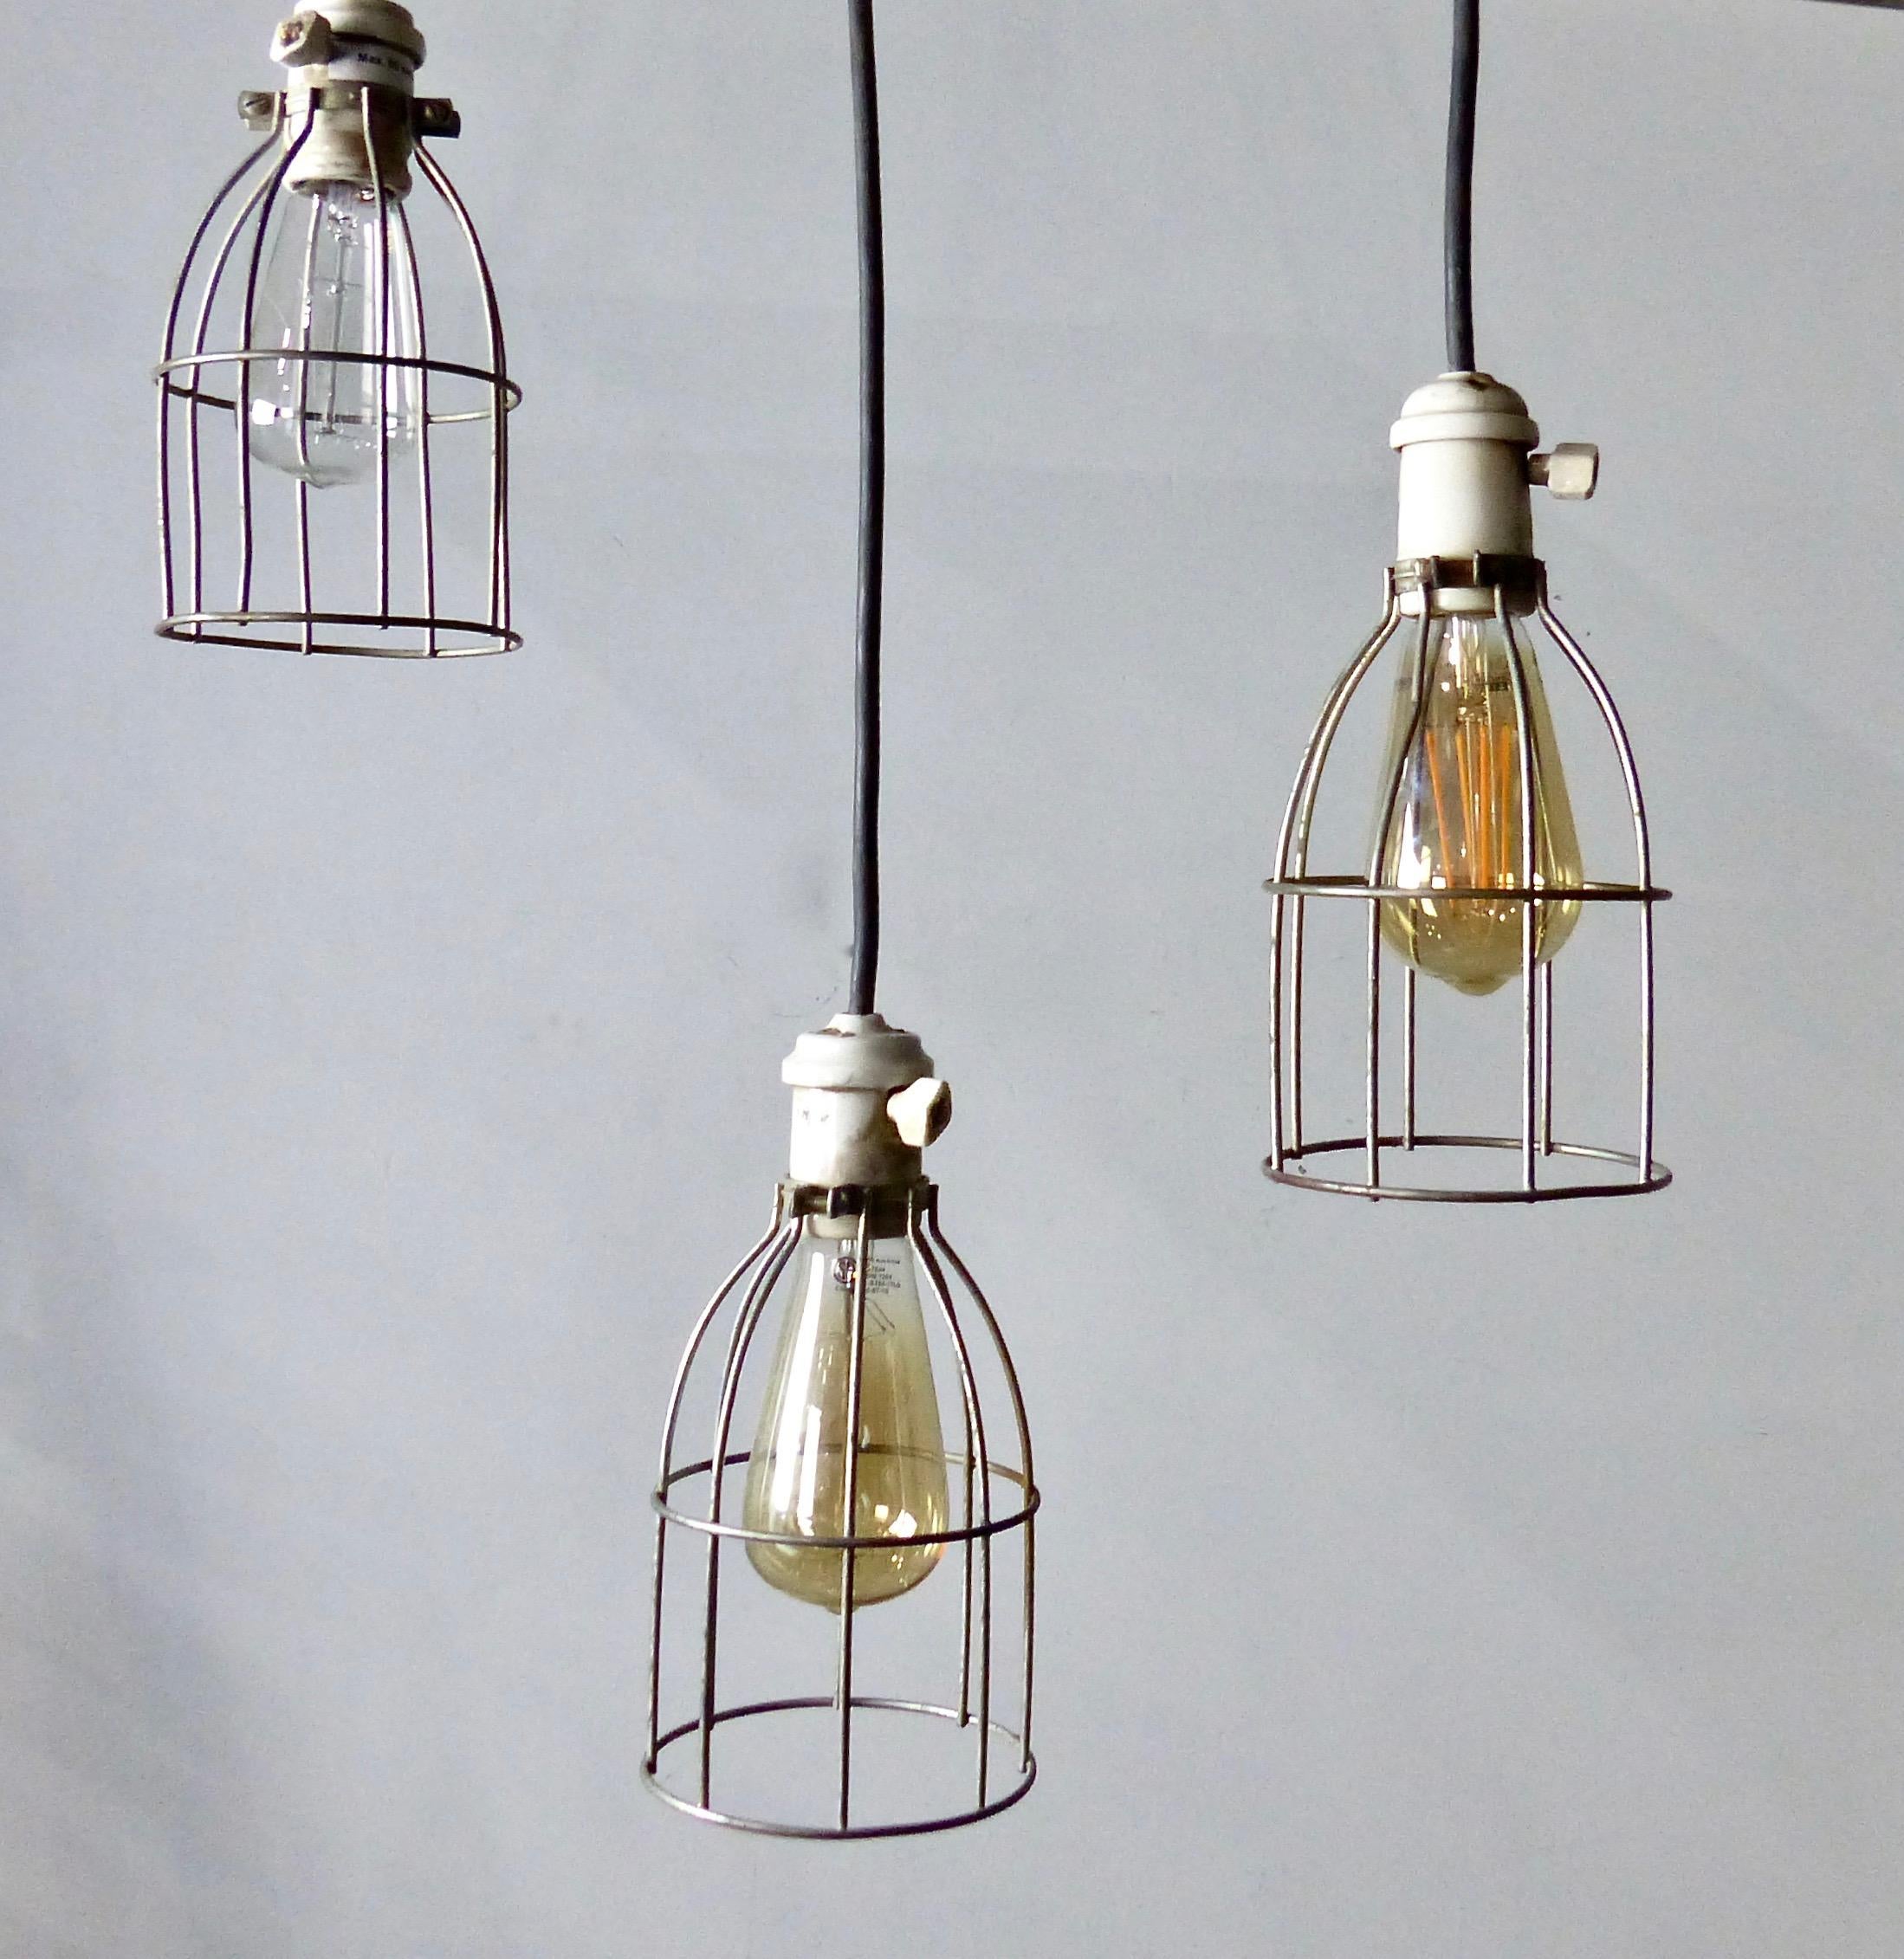 Simple but striking industrial caged lights. This set of three authentic, circa 1930s pendants feature ceramic housings. Re-wired and CSA approved to current electrical standards. Price per light.
Dimensions: 10” height x 5” diameter.